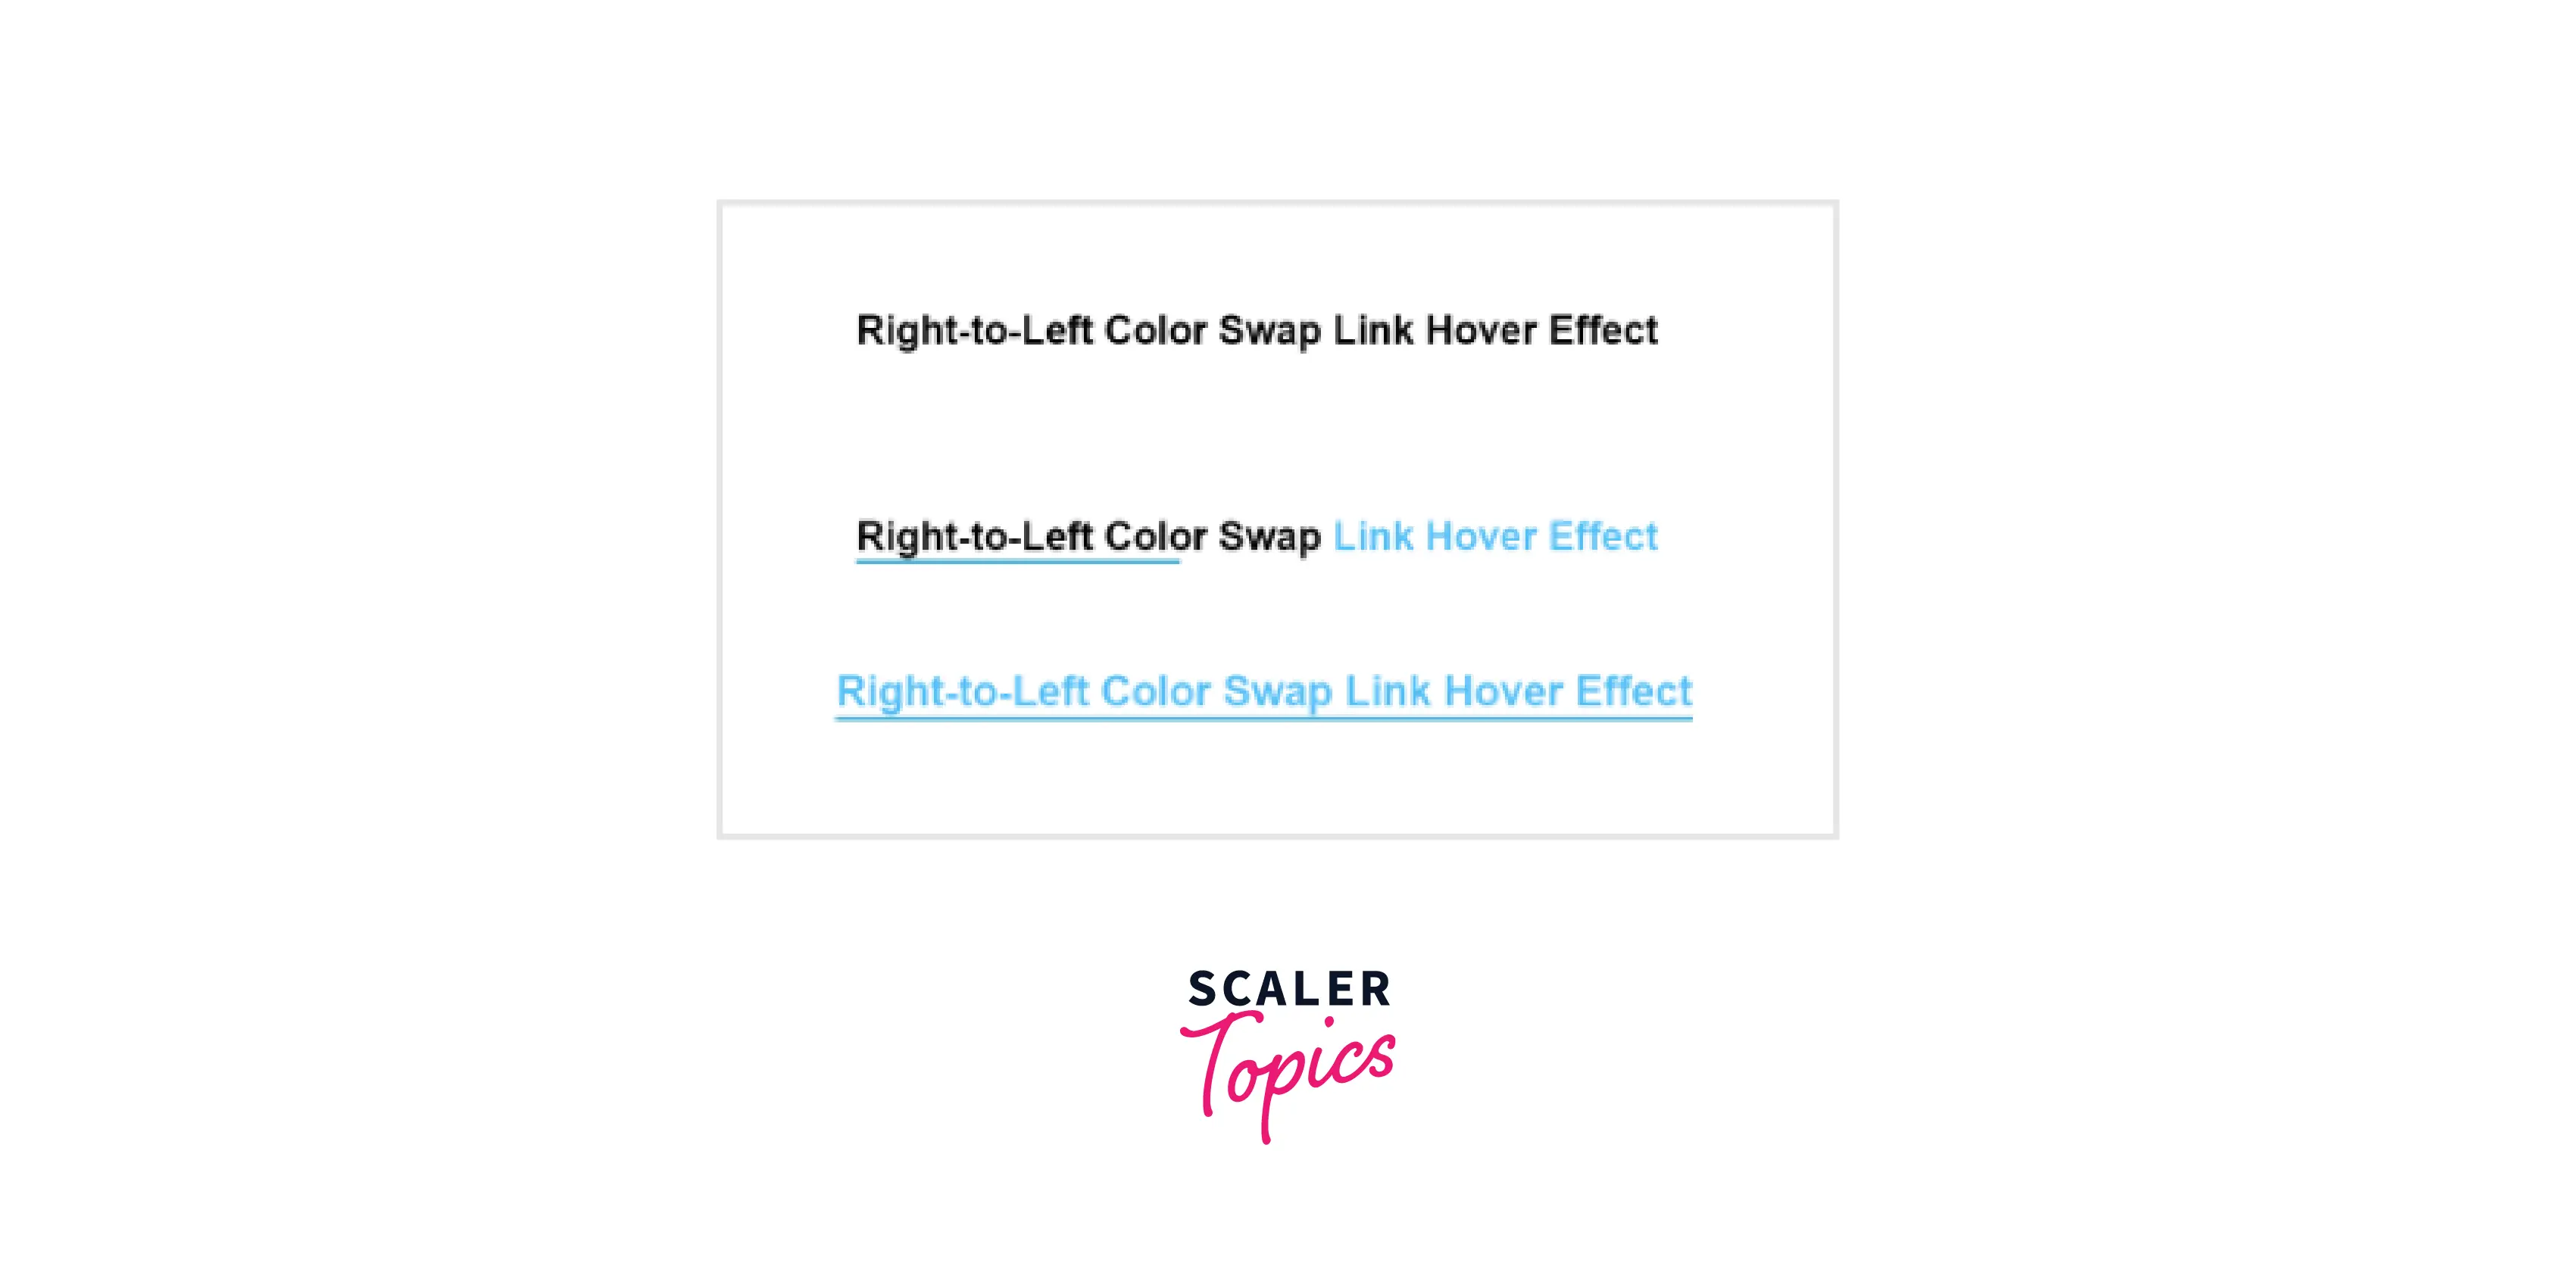 Right-to-Left Color Swap Link Hover Effect